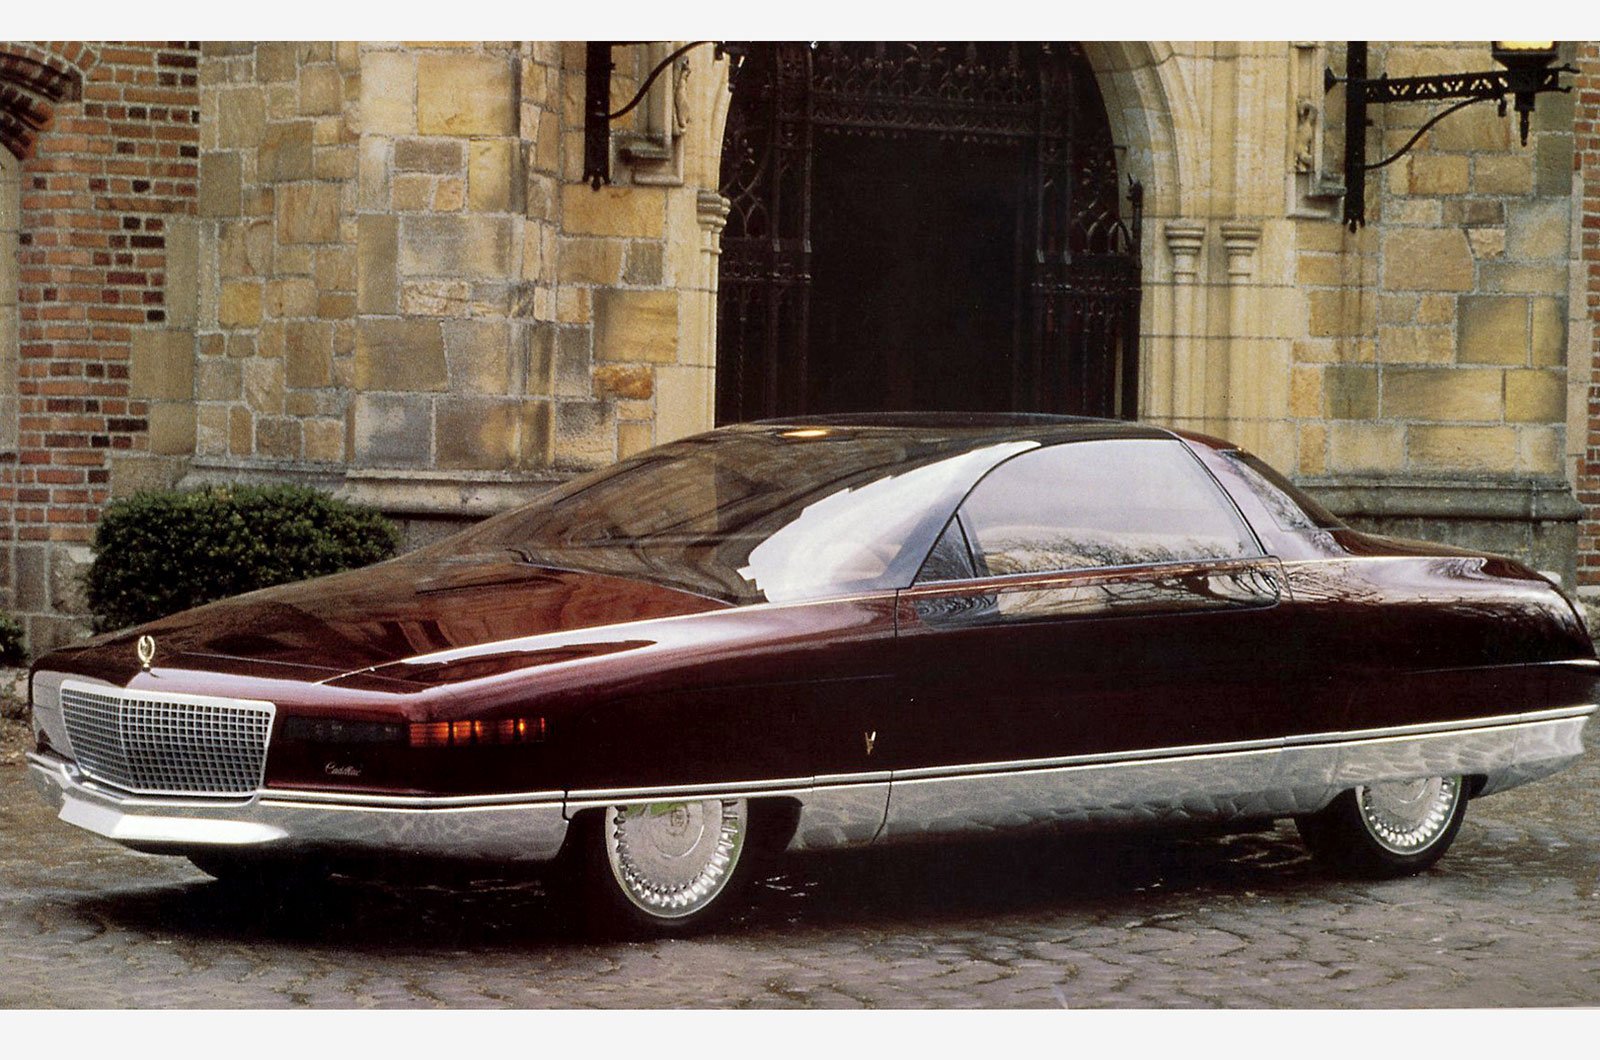 <p>When Cadillac came up with the Voyage four-door saloon concept in 1988 it should have quit while it was ahead. But instead the GM off-shoot came up with this two-door version which looked pretty good as far as the B-pillar, but then it all fell apart. Power came from a 436 hp V12, but that wasn't enough to stop it looking like a cut and shut.</p>